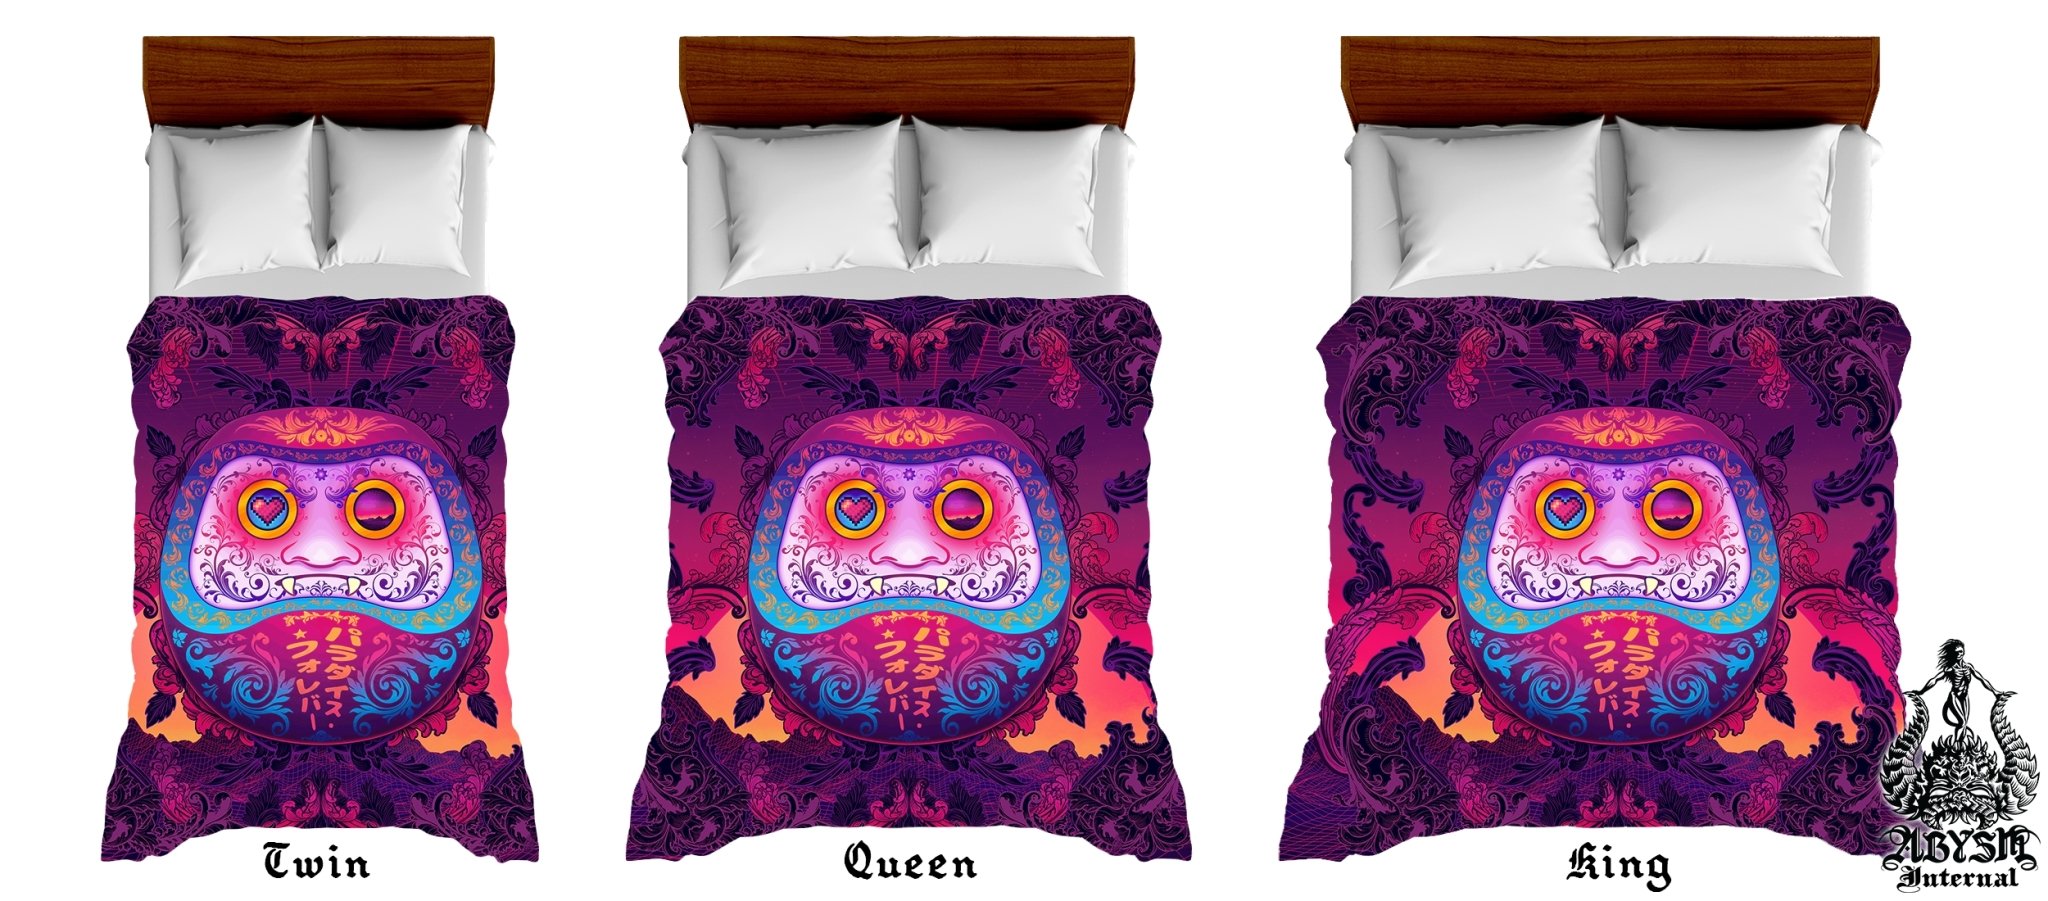 Japanese Vaporwave Bedding Set, Comforter and Duvet, Anime Bed Cover and Retrowave Bedroom Decor, King, Queen and Twin Size, Psychedelic Synthwave, 80s Gamer Room Art - Daruma - Abysm Internal